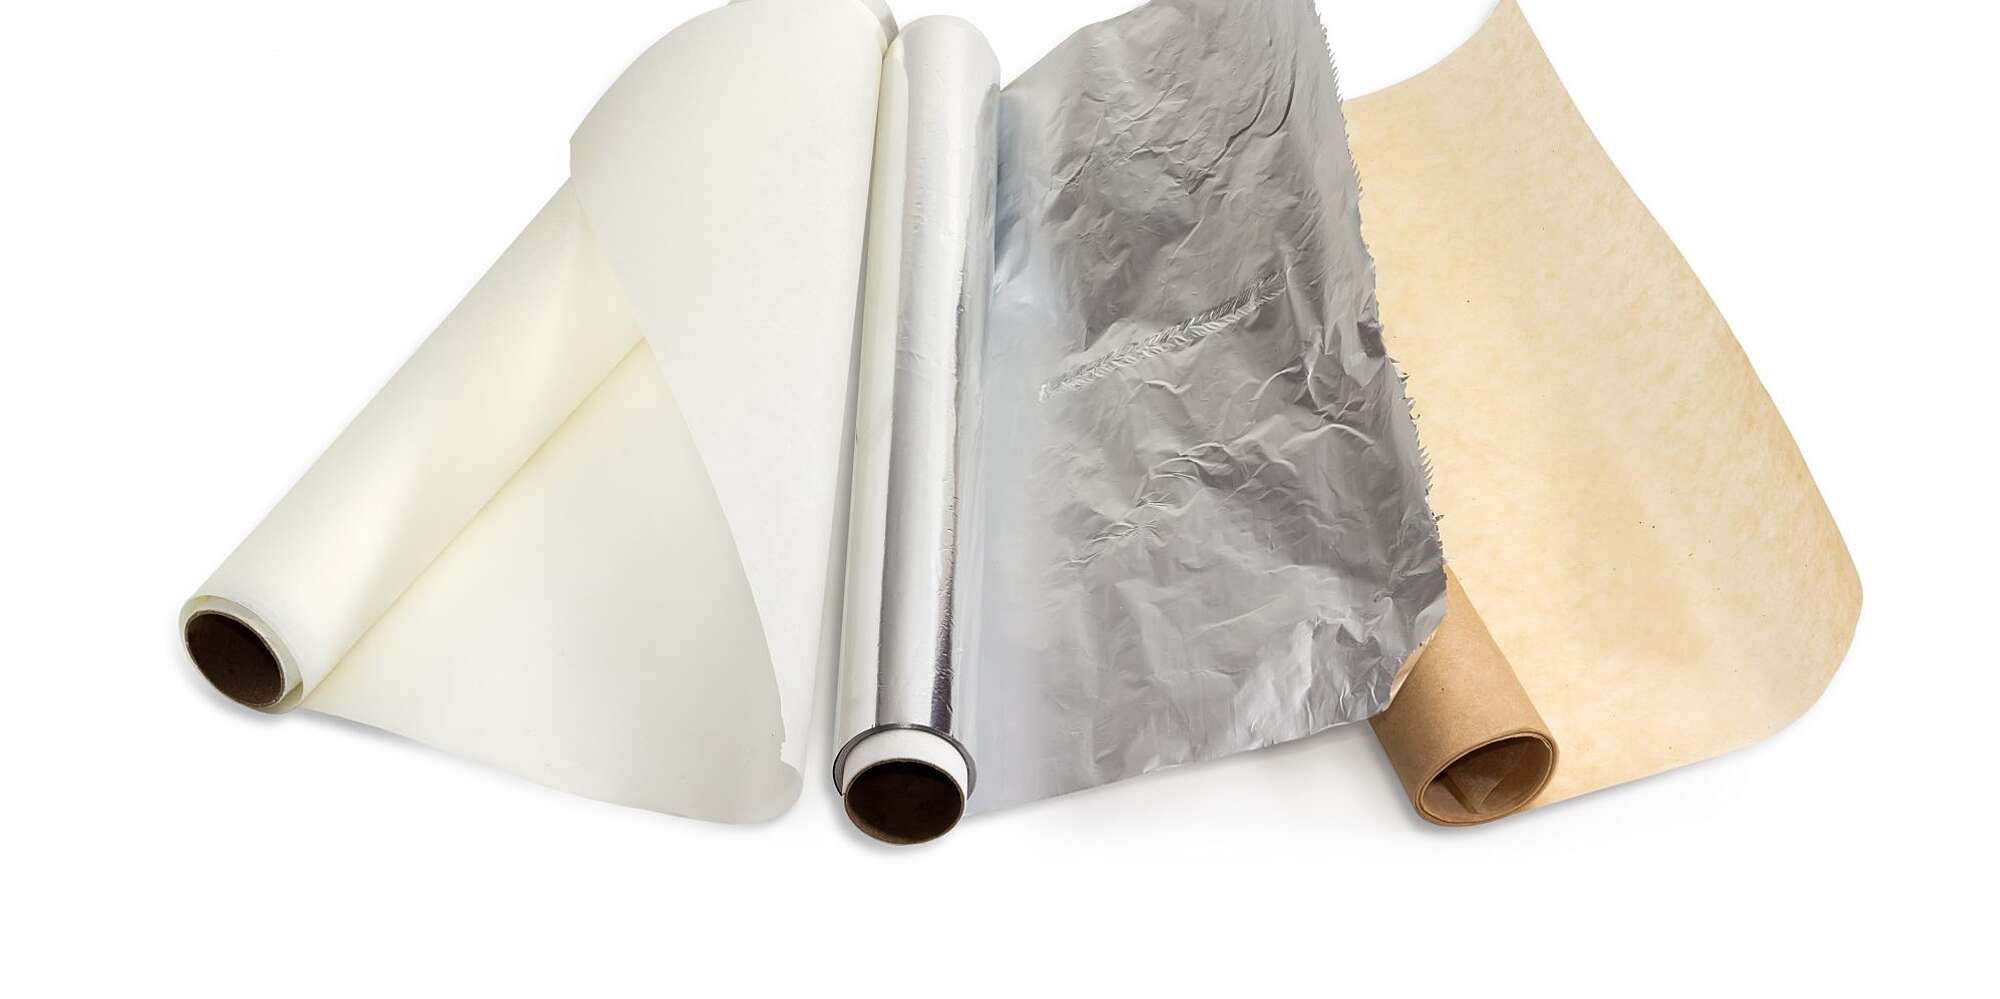 Can I Use Wax Paper Instead of Parchment Paper?